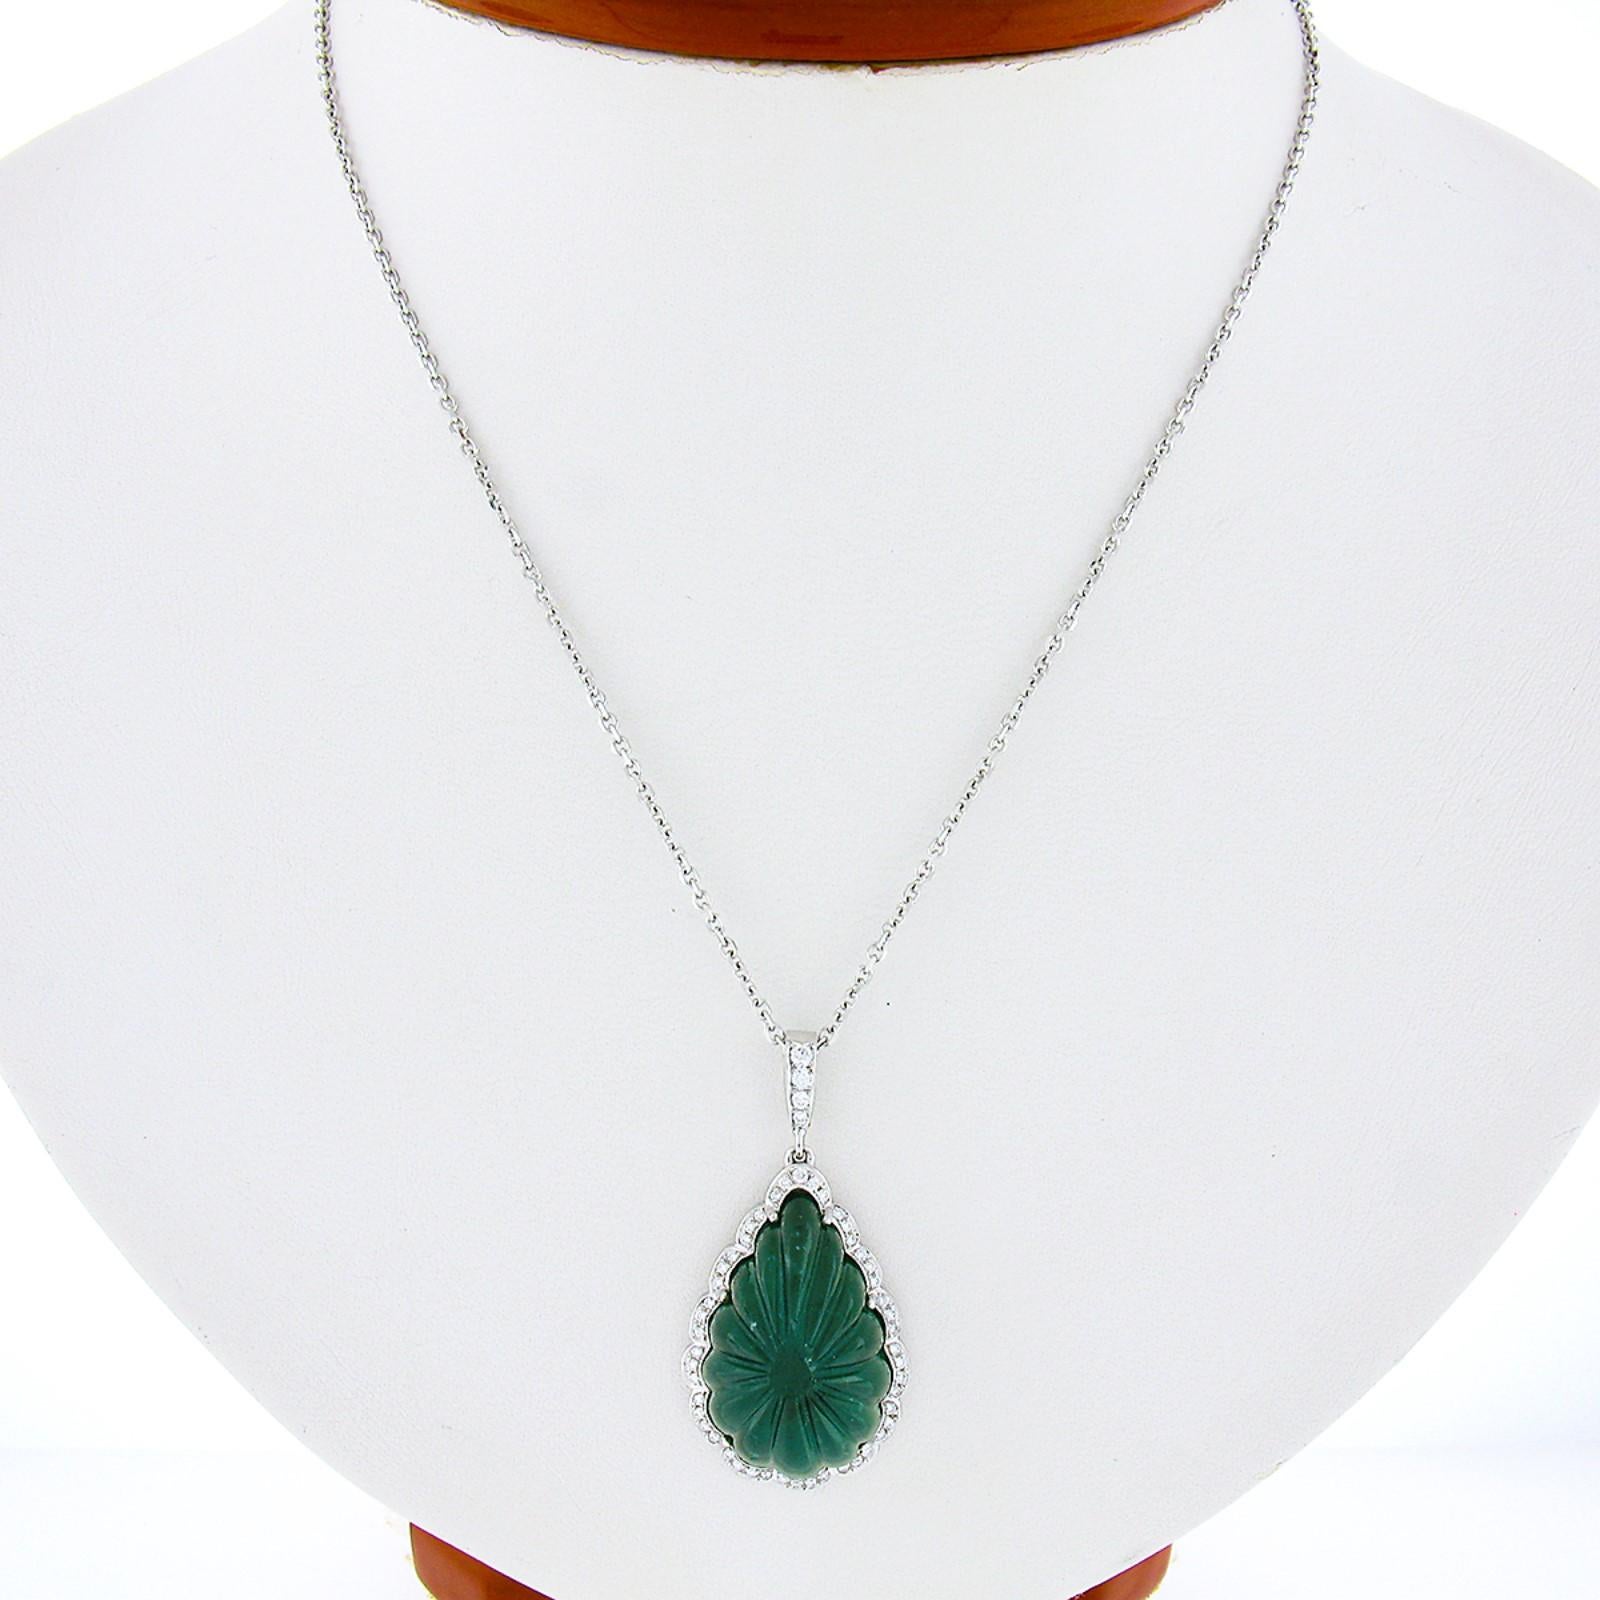 This incredible custom made pendant necklace is newly crafted in solid 18k white gold and features a large pear shape cabochon cut emerald that has been perfectly carved into showing a truly elegant scalloped design throughout. This beautiful stone